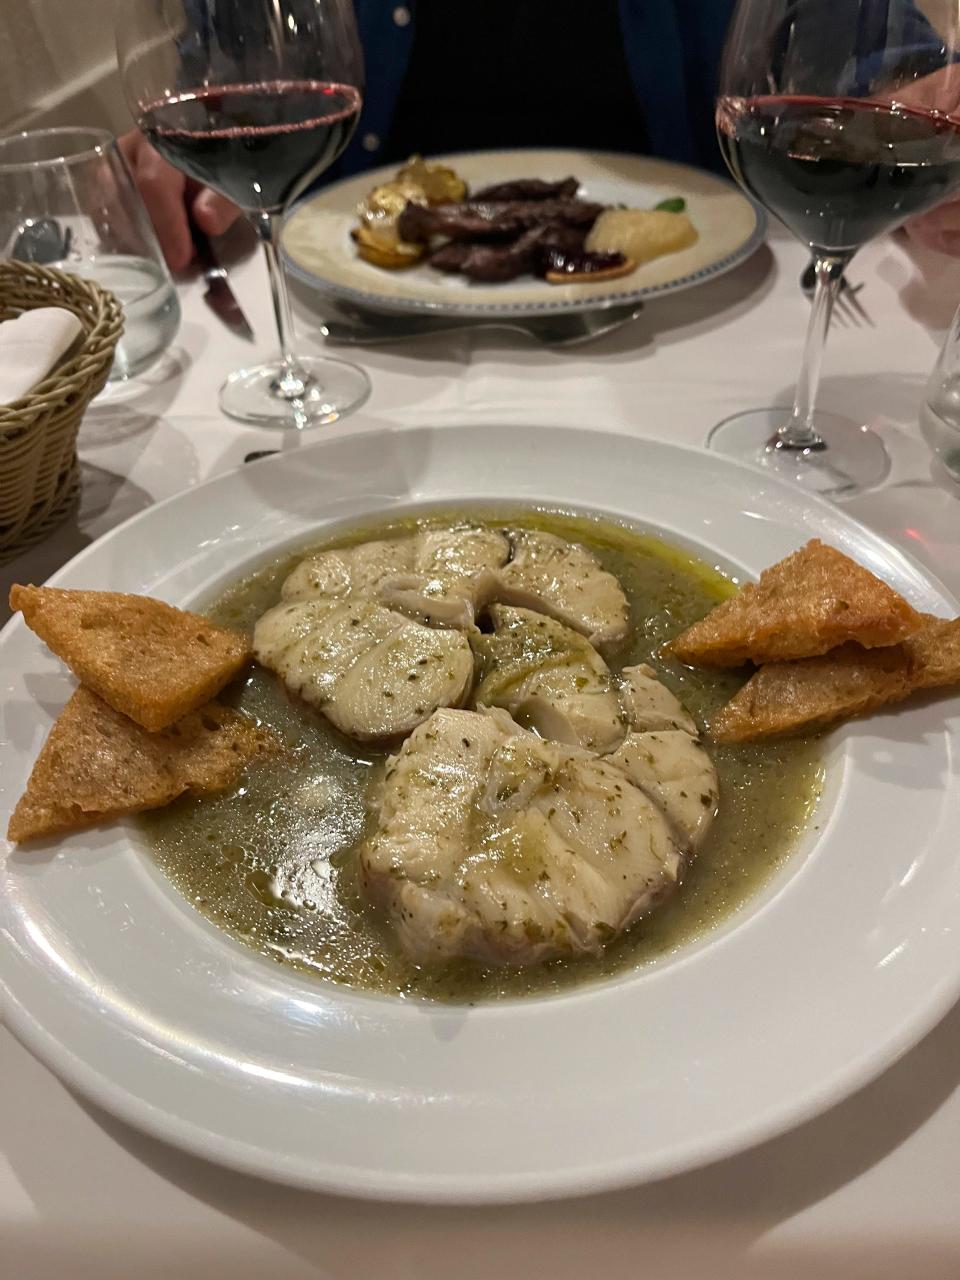 Traditional Alentejan dishes, dogfish in coriander sauce, foreground, and medallions of local black pork, smashed apples and roasted potatoes are served at Restaurante Fialho in Évora, Portugal on Sept. 20, 2023. (Kristen de Groot via AP)